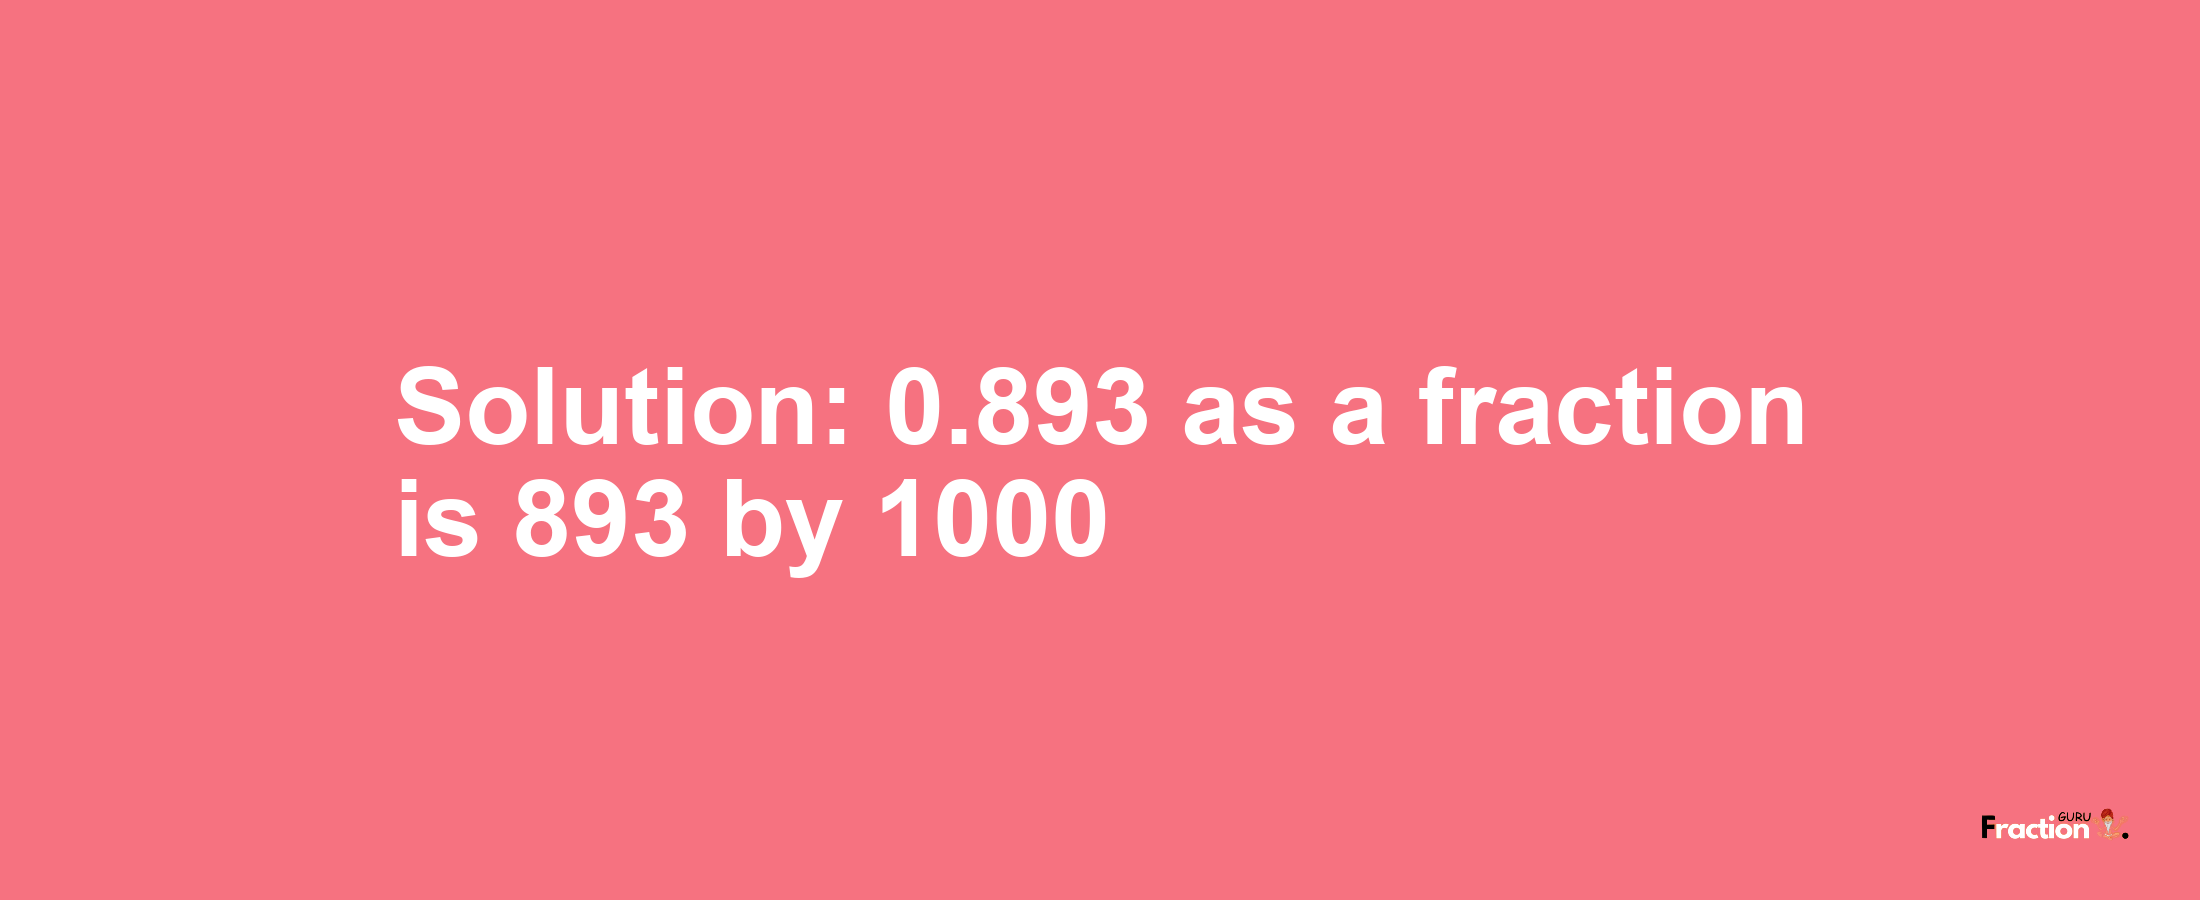 Solution:0.893 as a fraction is 893/1000